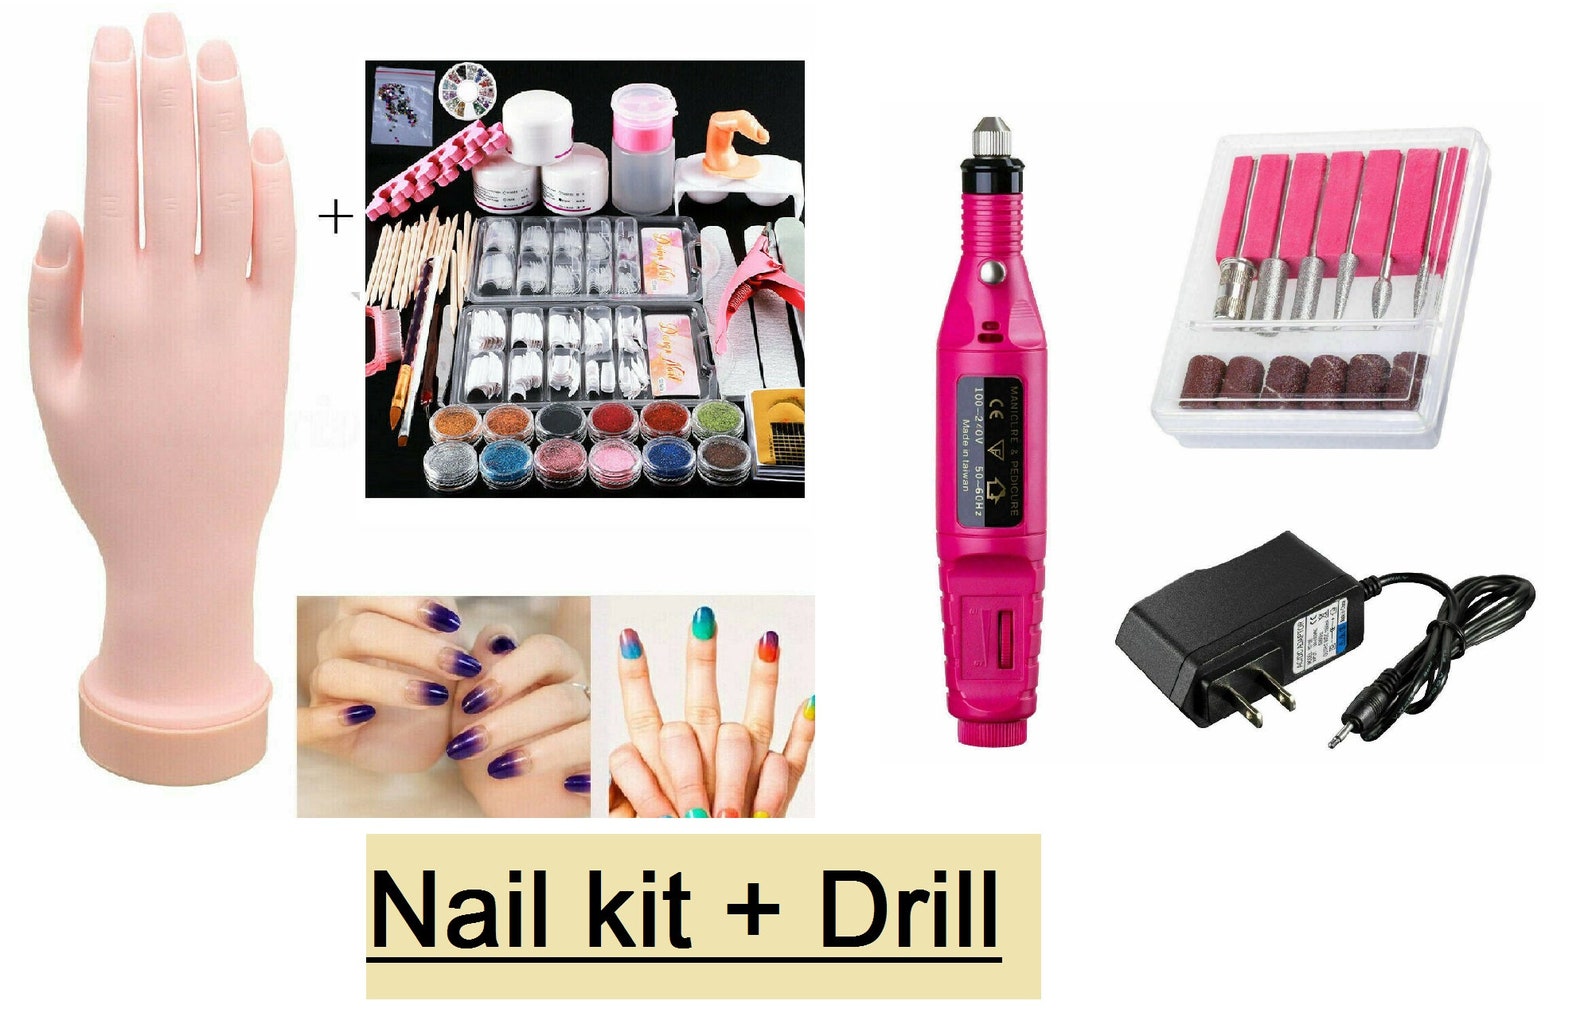 5. Best Acrylic Nail Kits for At-Home Use - wide 6